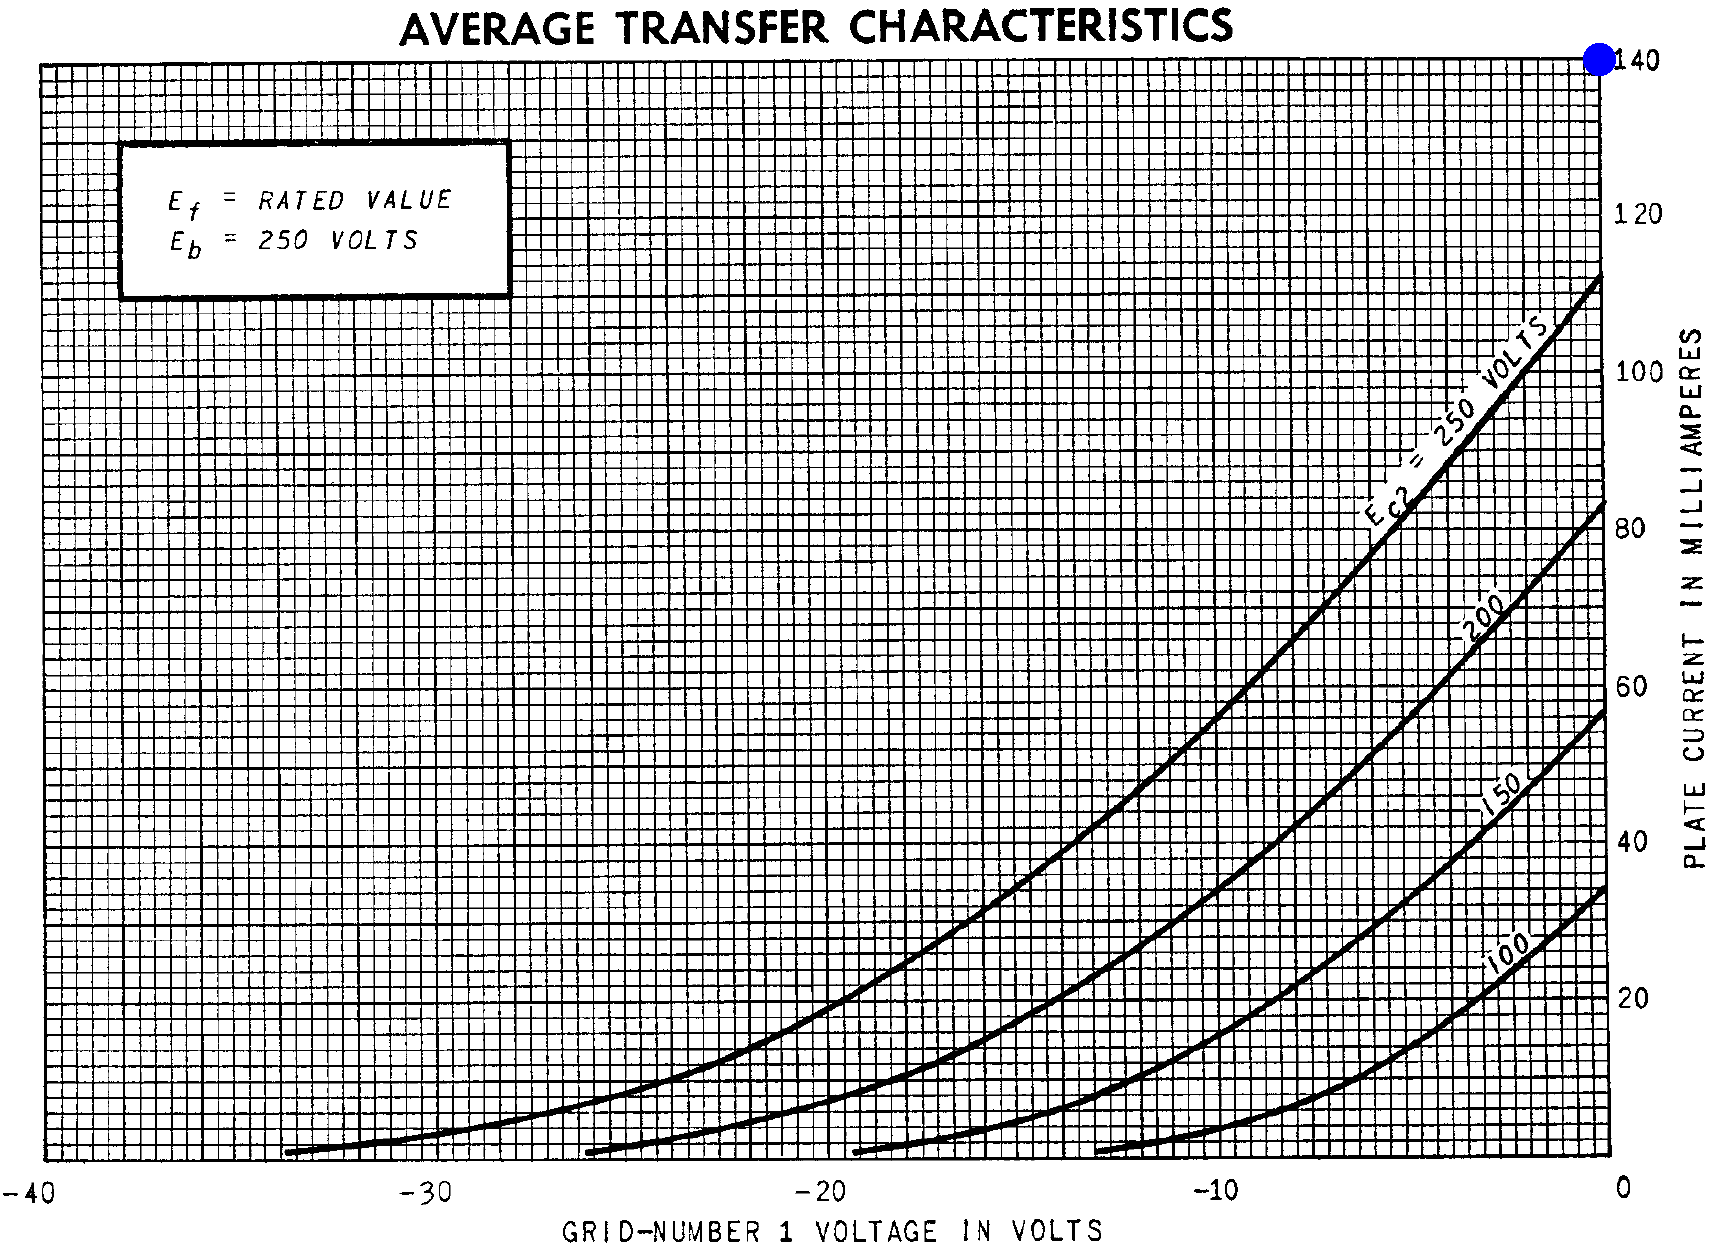 6V6 plate transfer characteristics and reference point